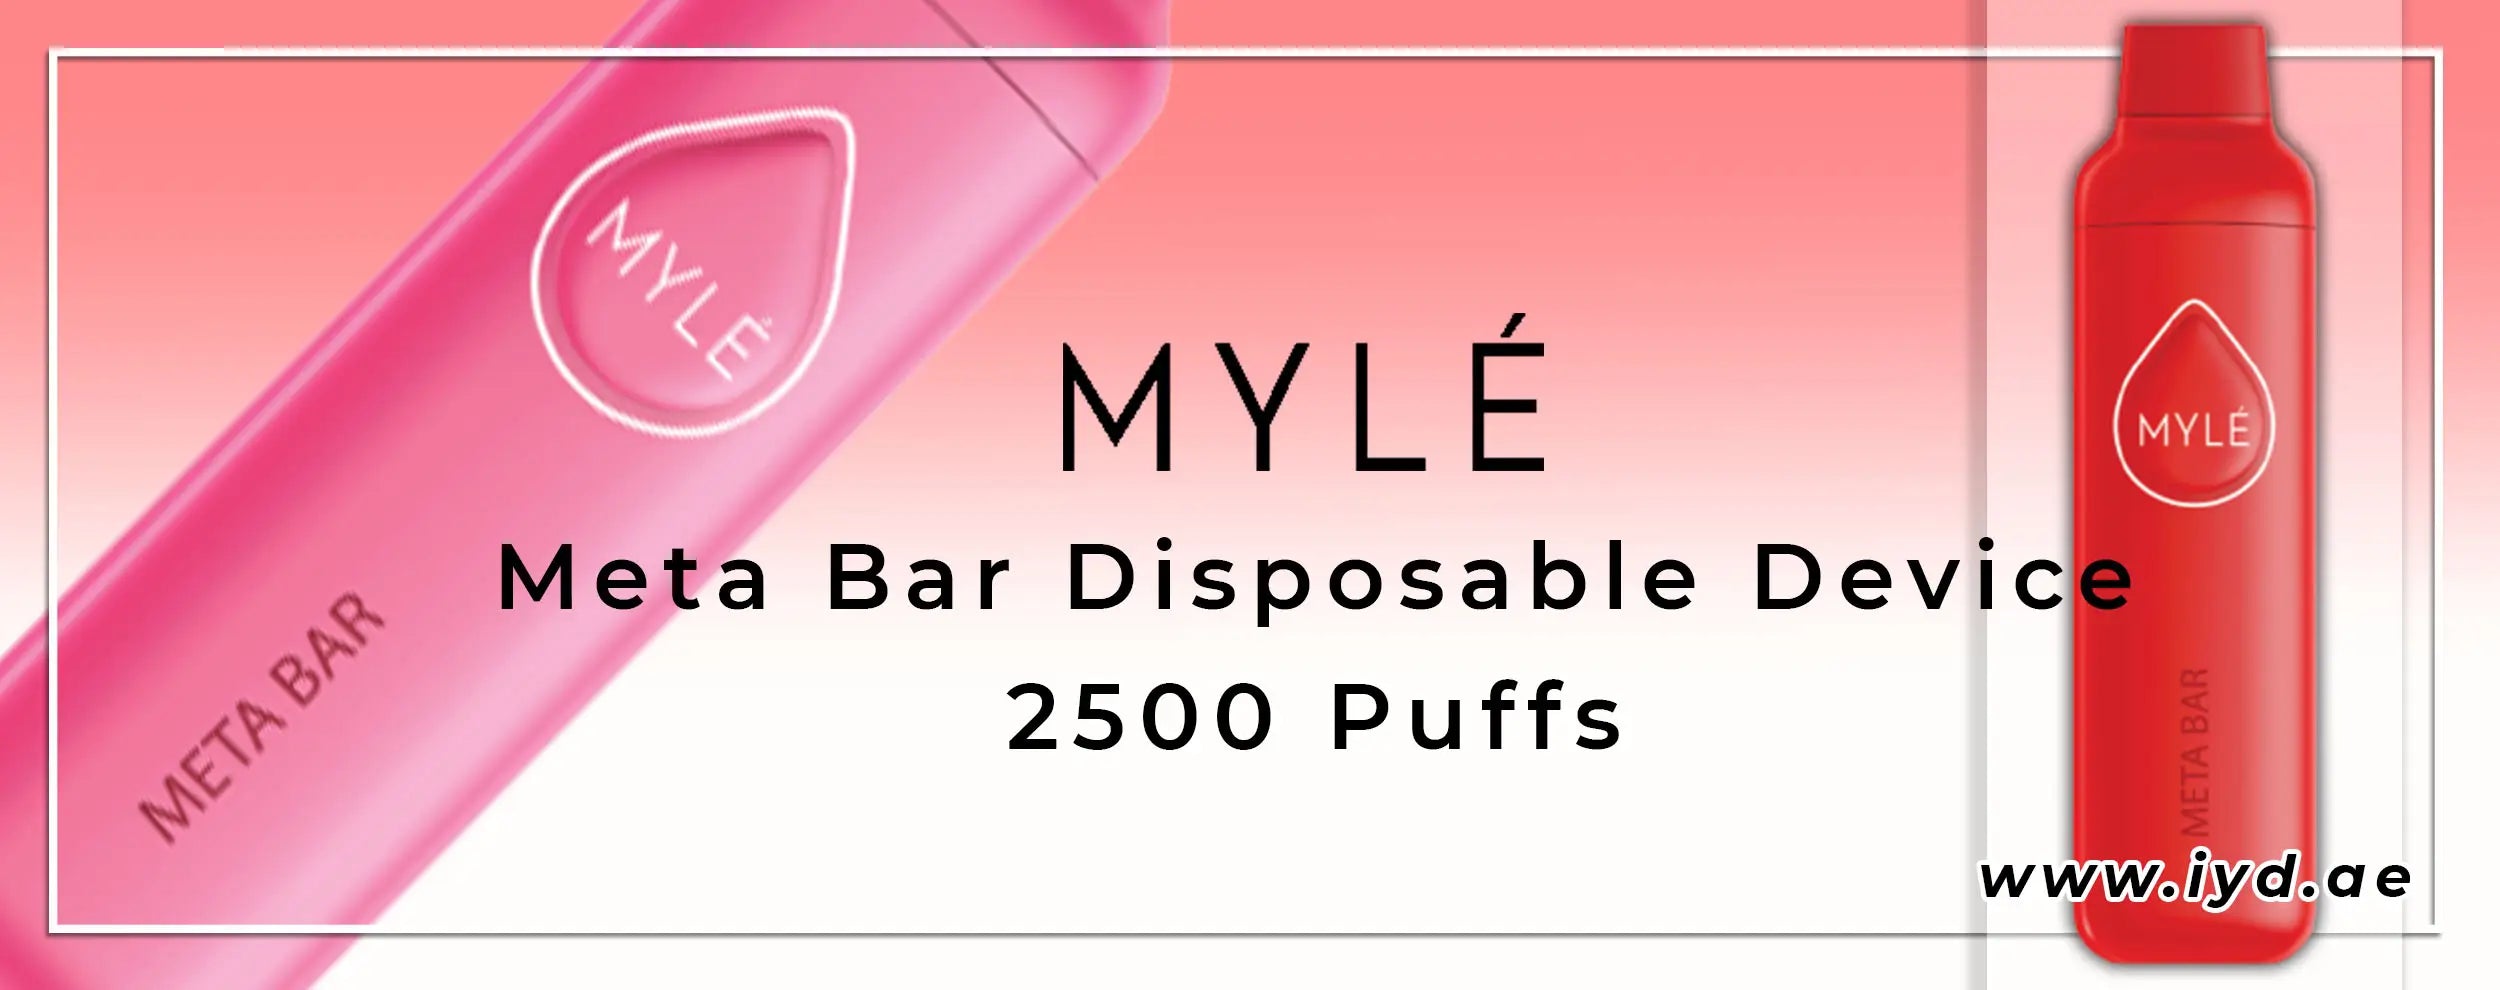 Myle Meta Bar Disposable Devices (2500 Puffs)